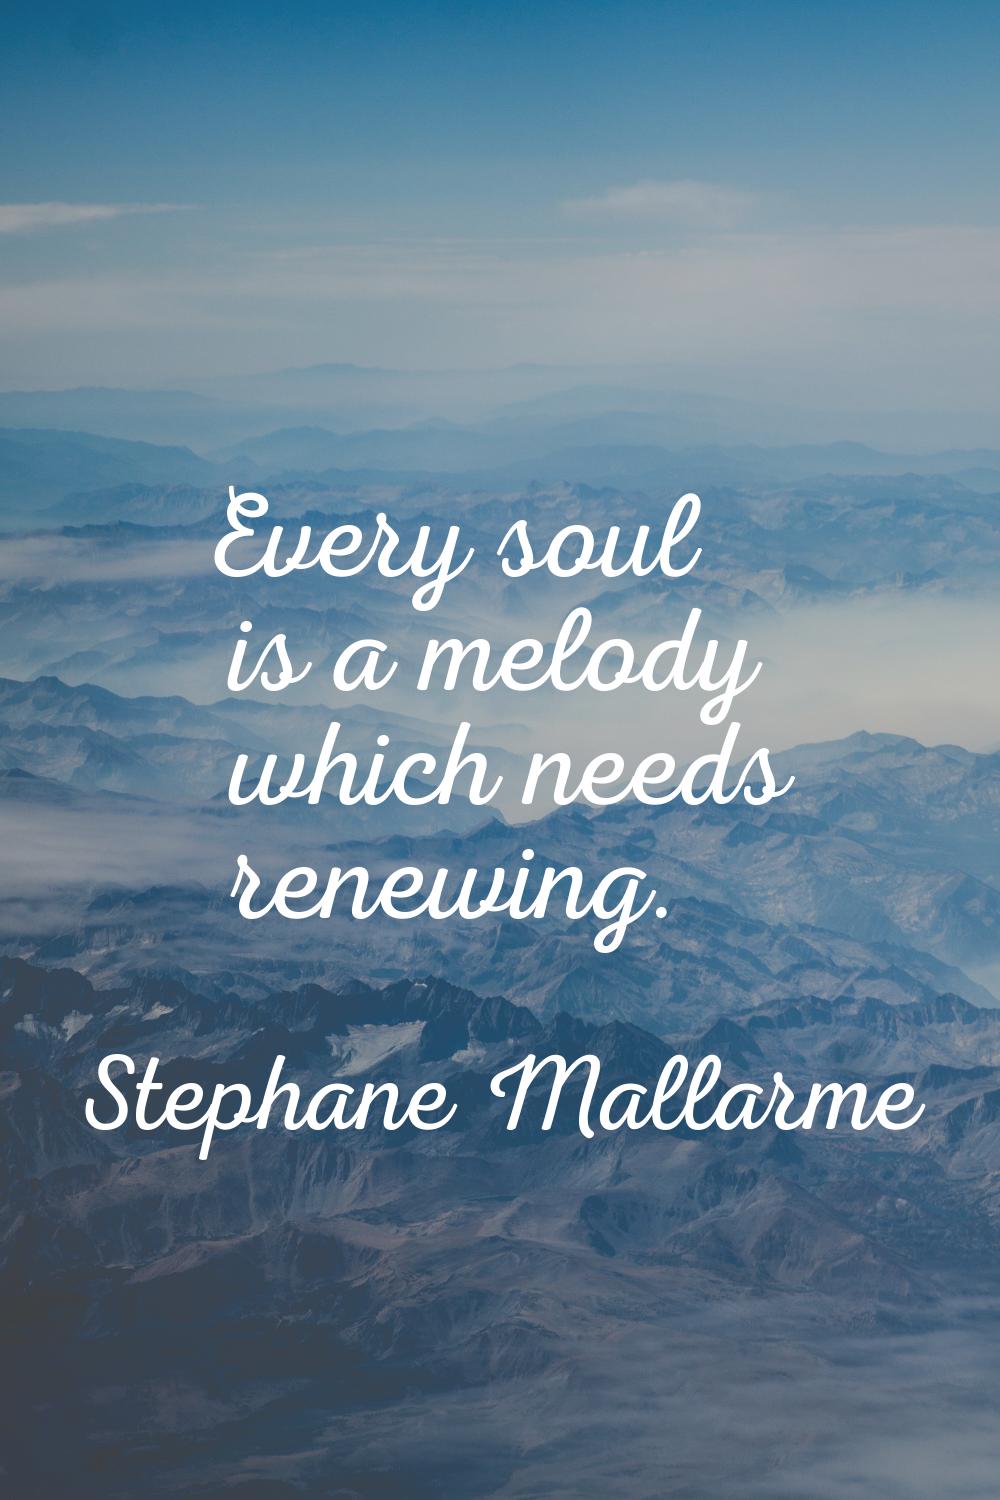 Every soul is a melody which needs renewing.